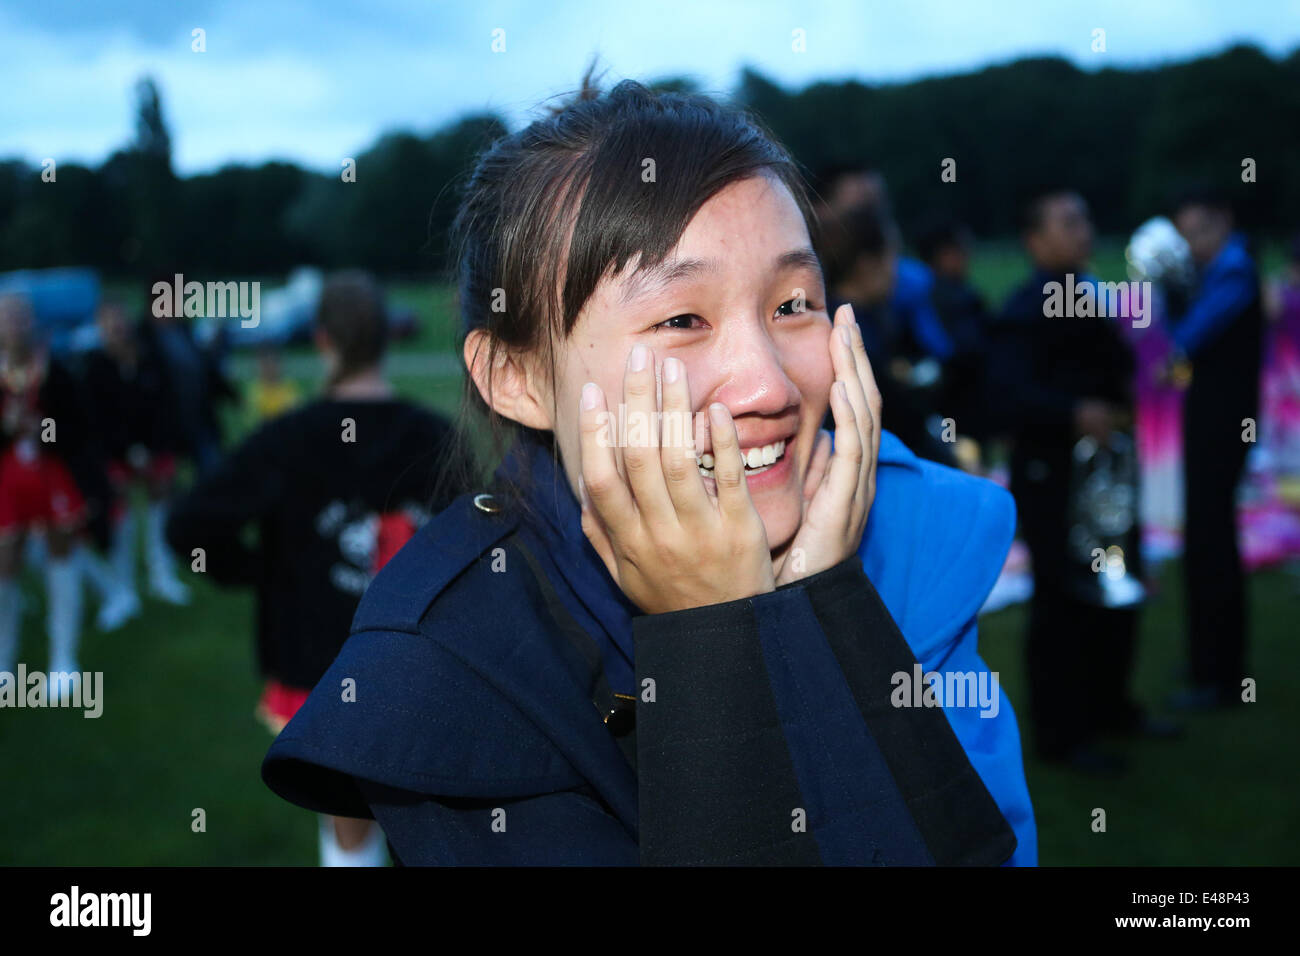 Rastede, Germany. 5th July, 2014. Cheng Yi, member of Beihang University's marching band, cries with joy after finishing their performance during the 59th International Rasteder Music Day in Rastede, Germany, on July 5, 2014. More than 50 bands and thousands of musicians from 6 countries and regions took part in the three-day International Rasteder Music Day, one of the oldest music festivals in Germany. Credit:  Zhang Fan/Xinhua/Alamy Live News Stock Photo